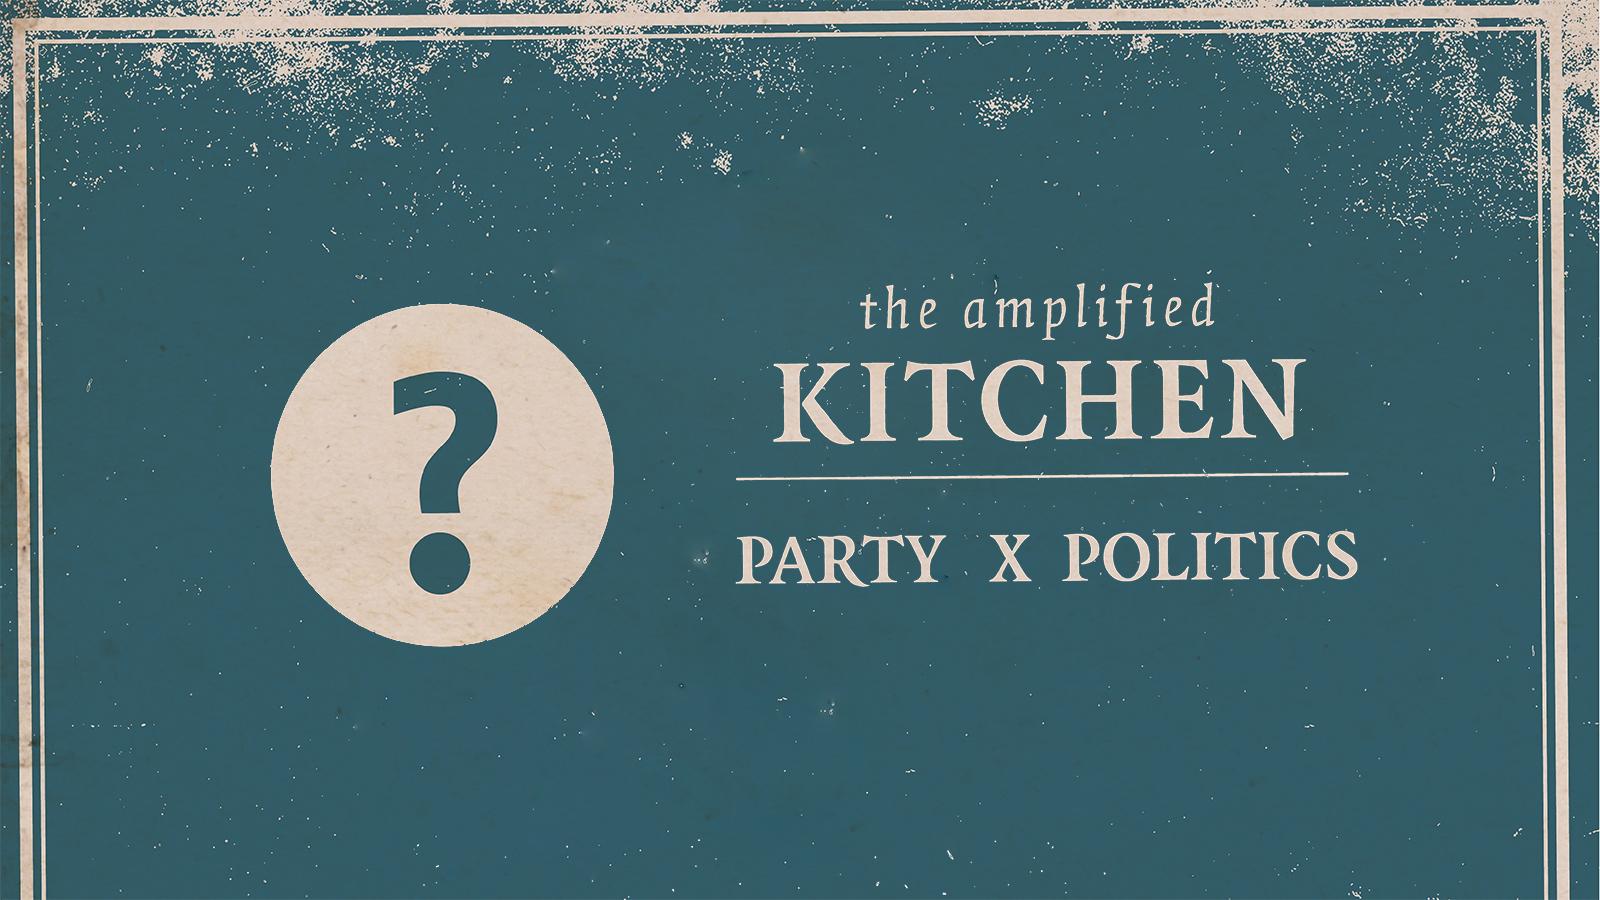 Amplified Kitchen Party x Politics Lead